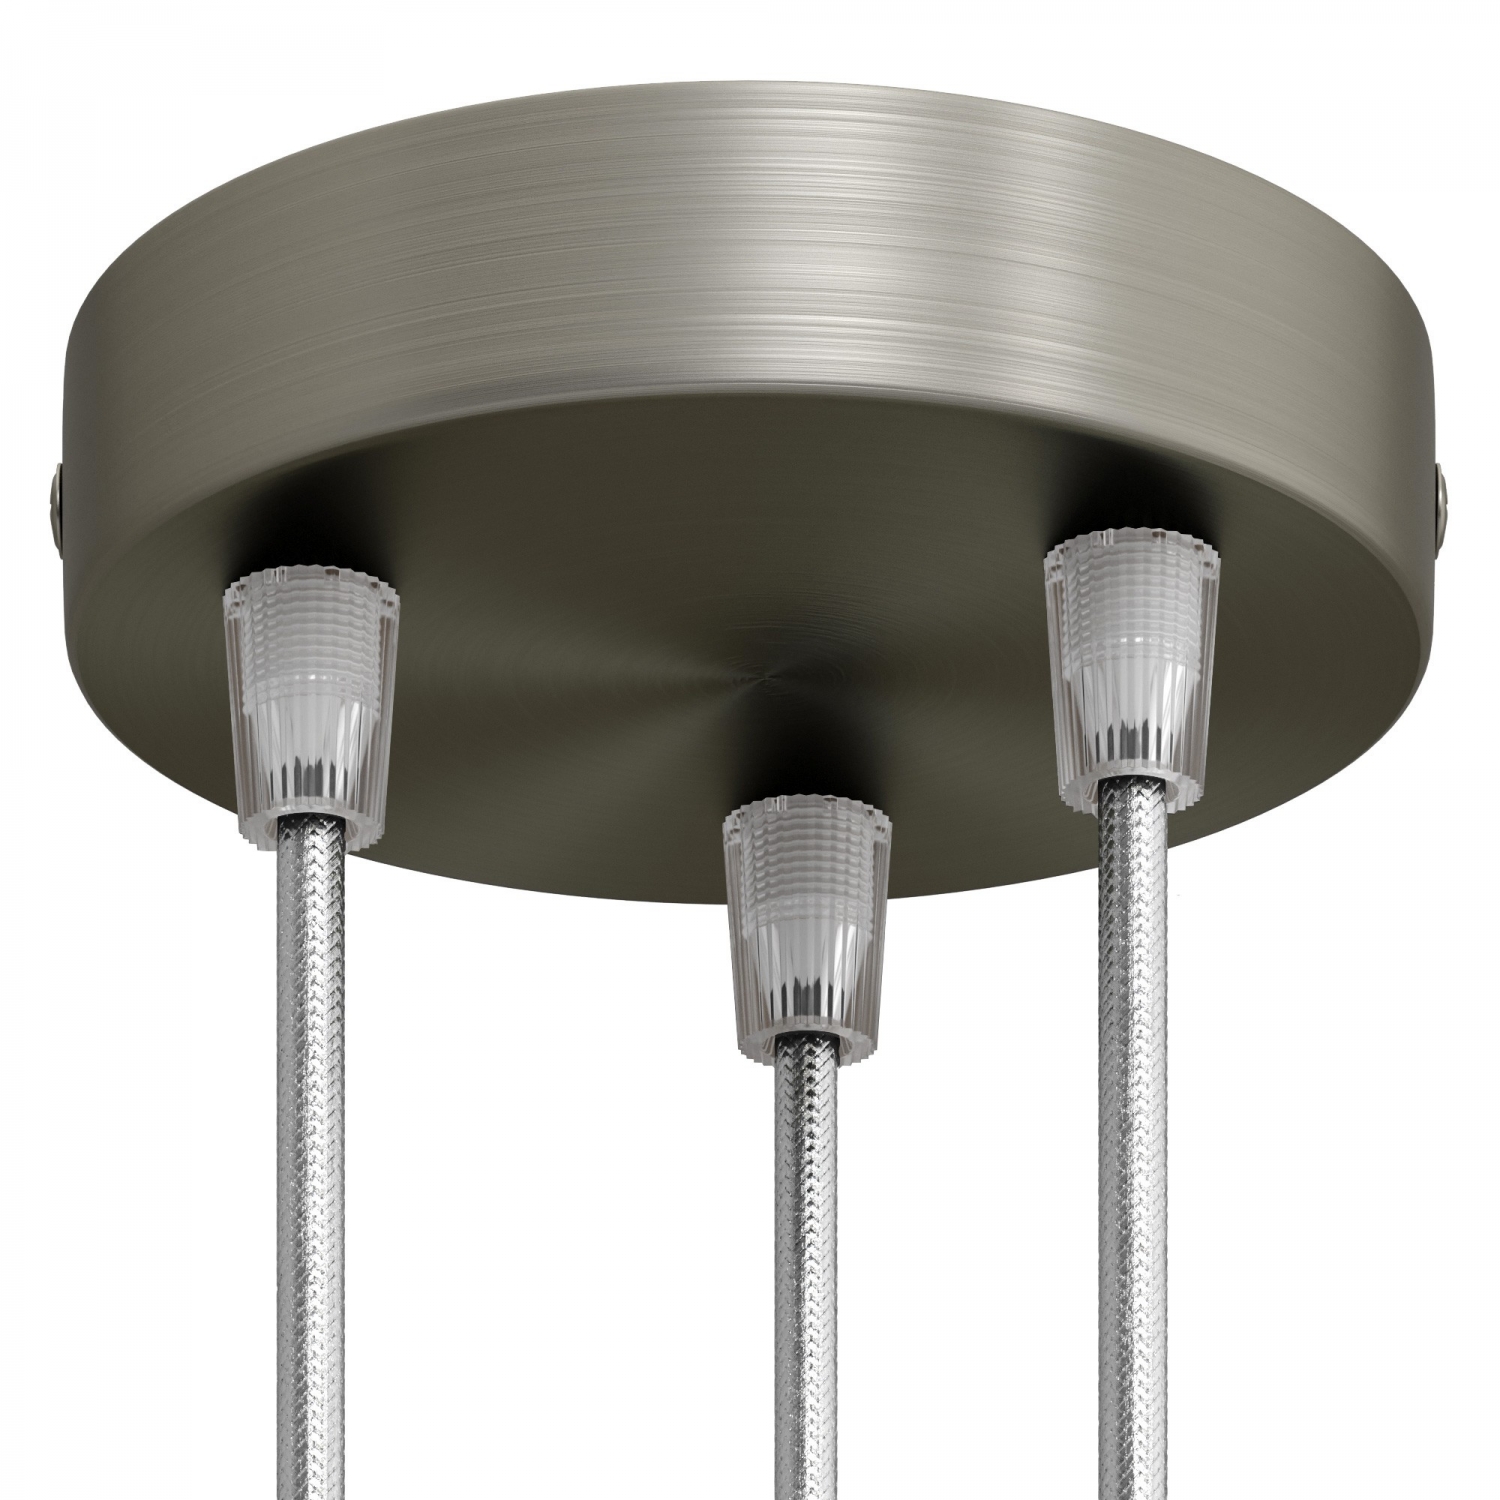 Cylindrical metal 3-hole ceiling rose kit